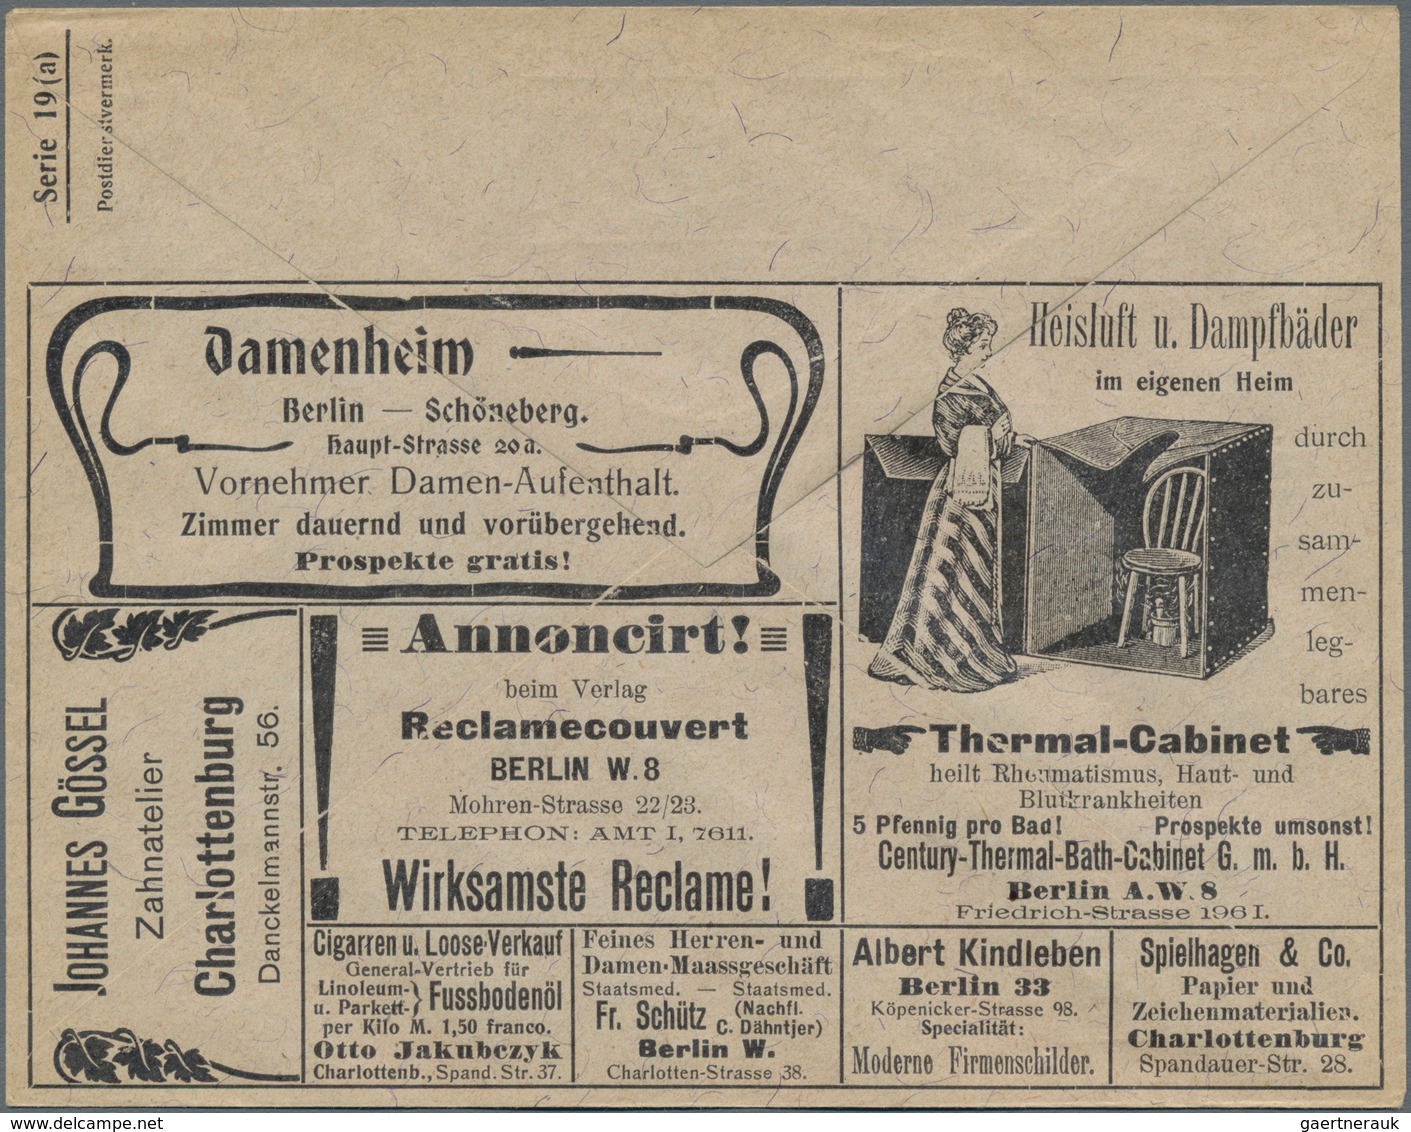 Thematik: Anzeigenganzsachen / Advertising Postal Stationery: 1902 (approx.), German Reich. Private - Unclassified